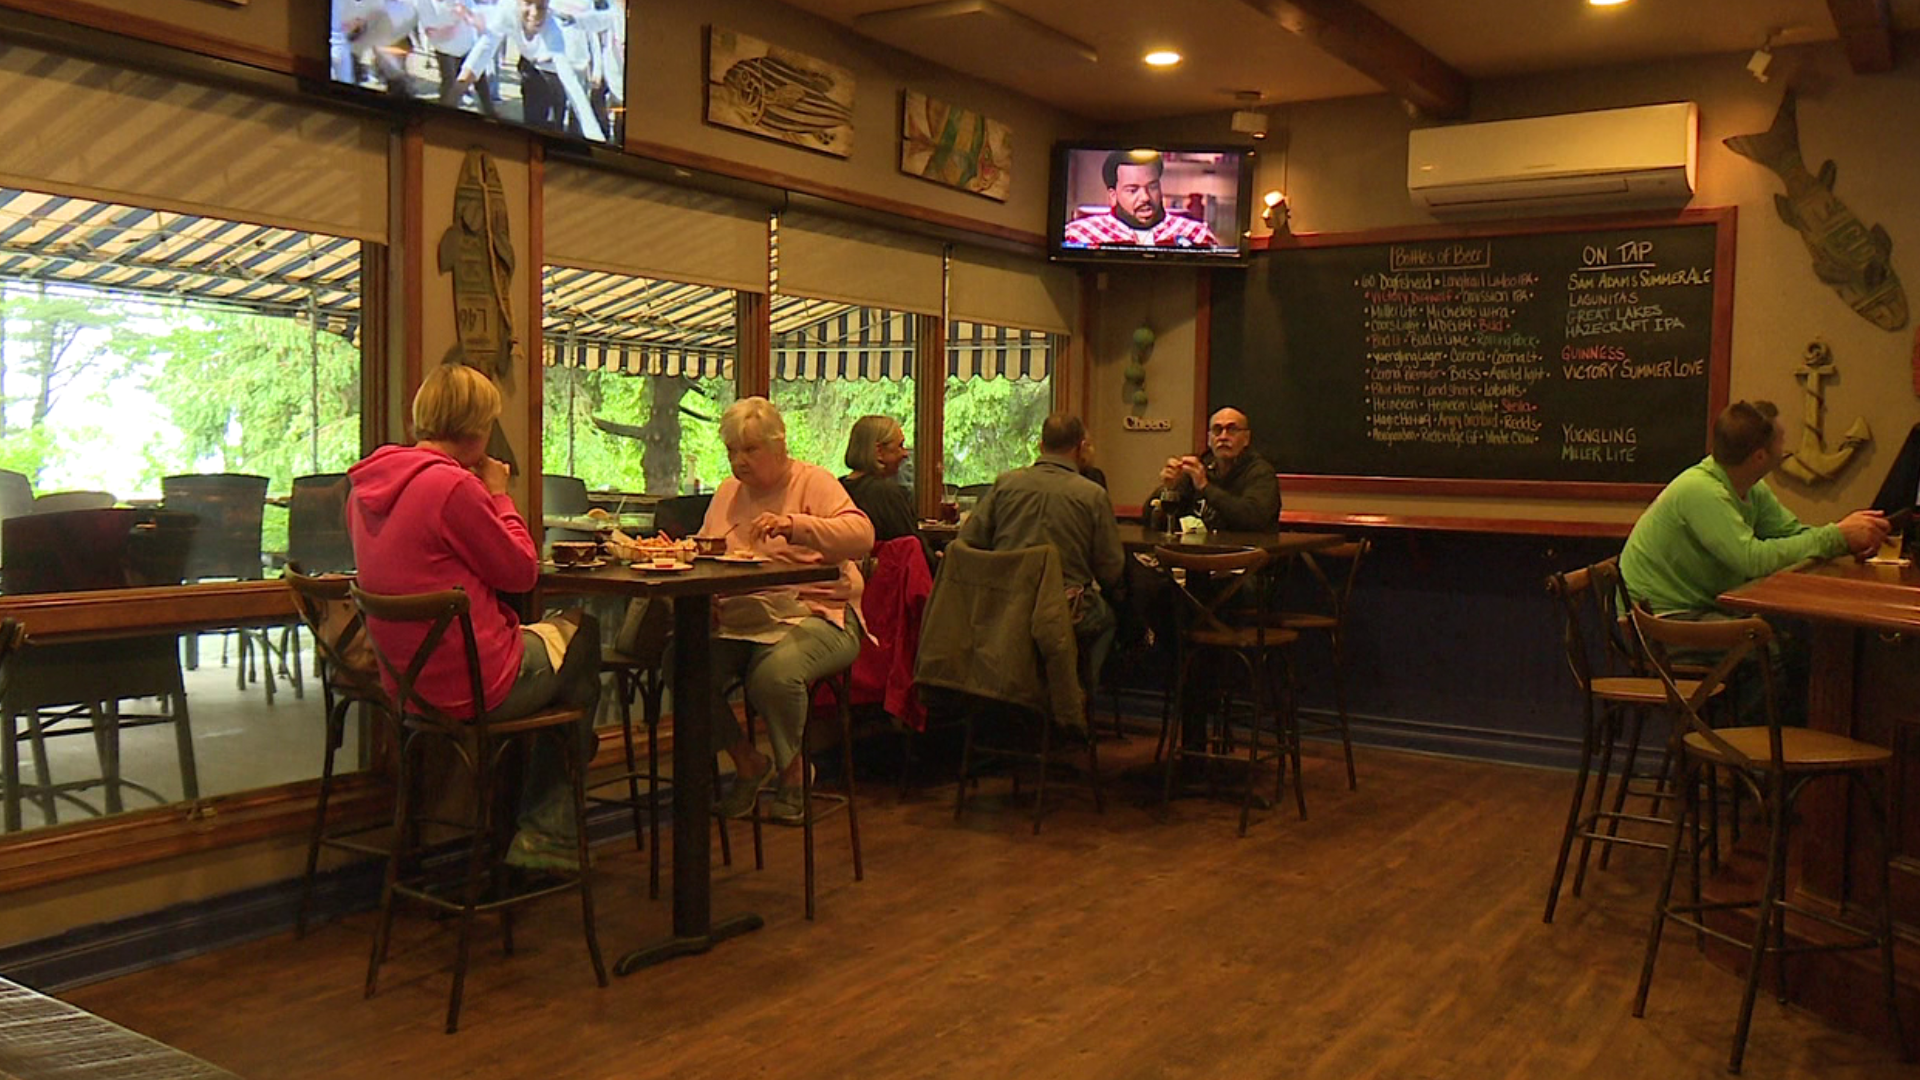 Busy bars and restaurants near Lake Wallenpaupack are getting ready for Monday's lifted restrictions.